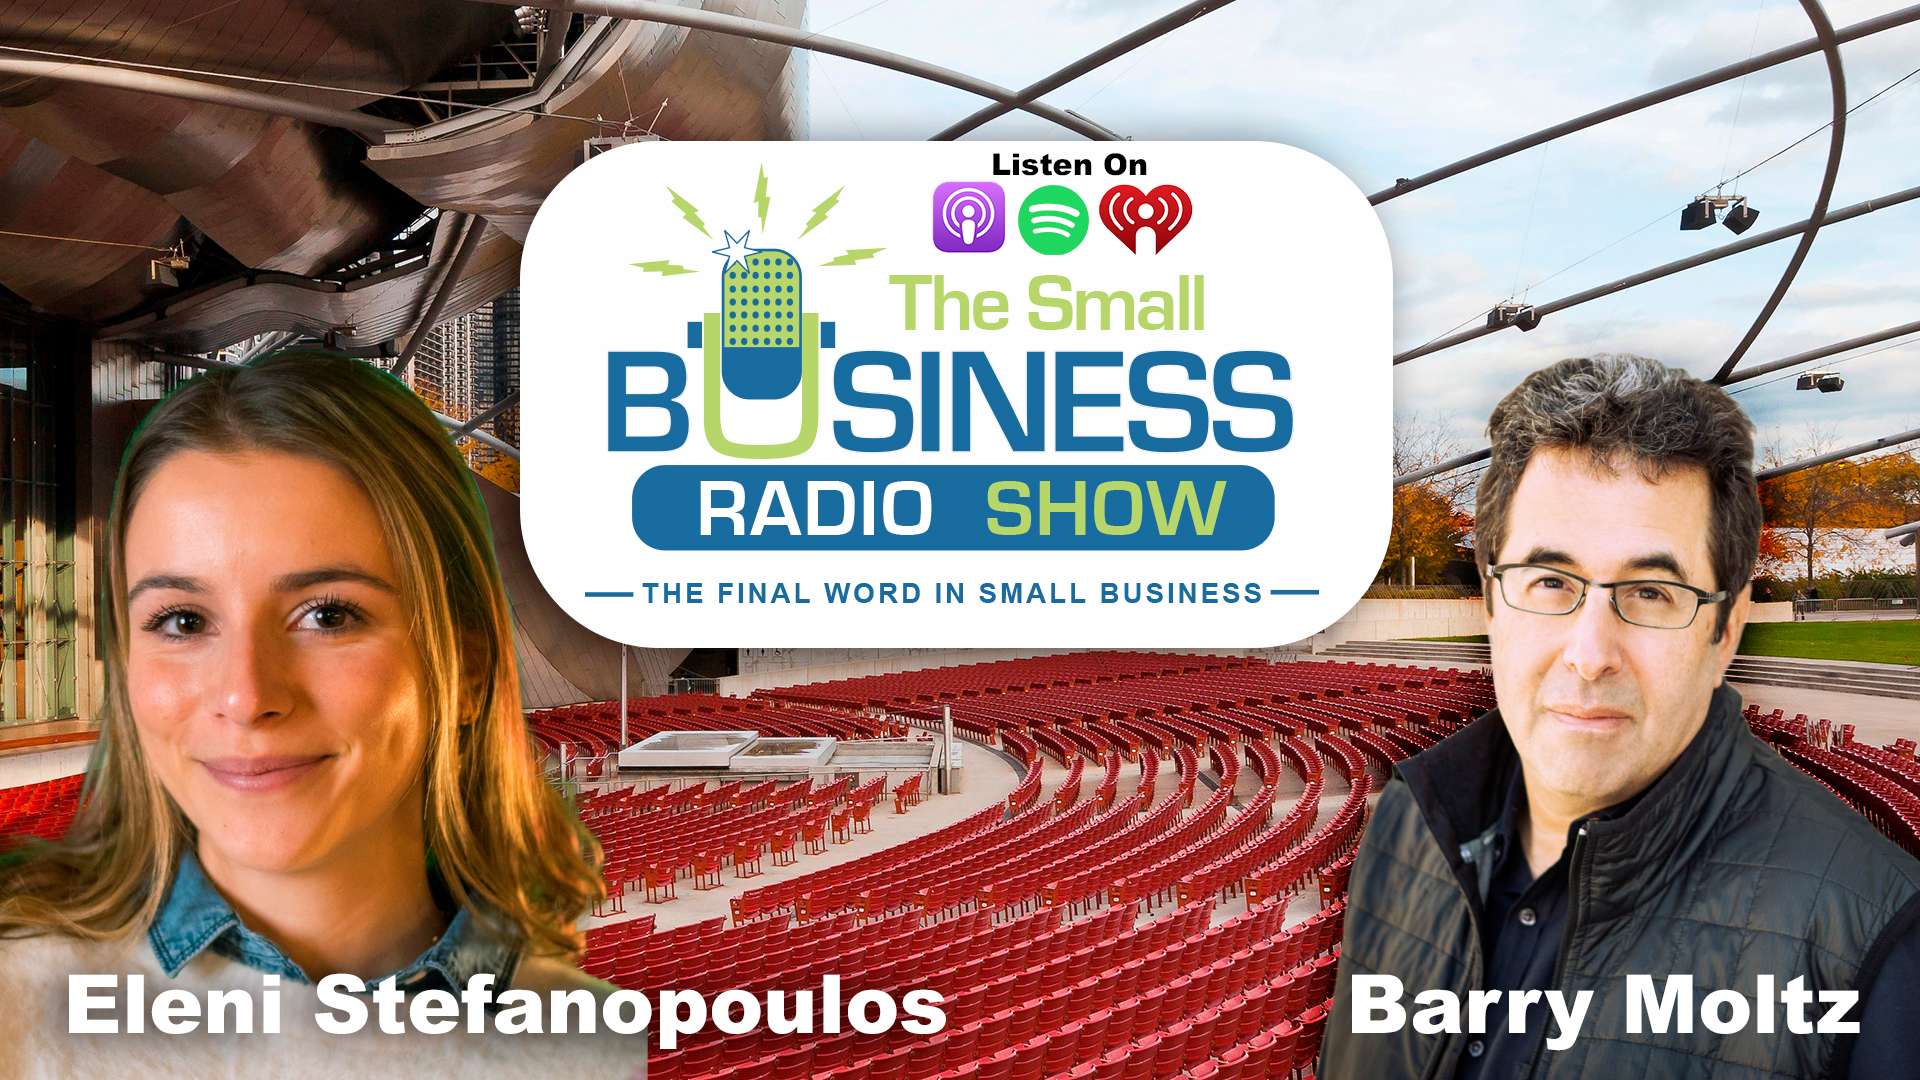 Eleni Stefanopoulos on The Small Business Radio Show